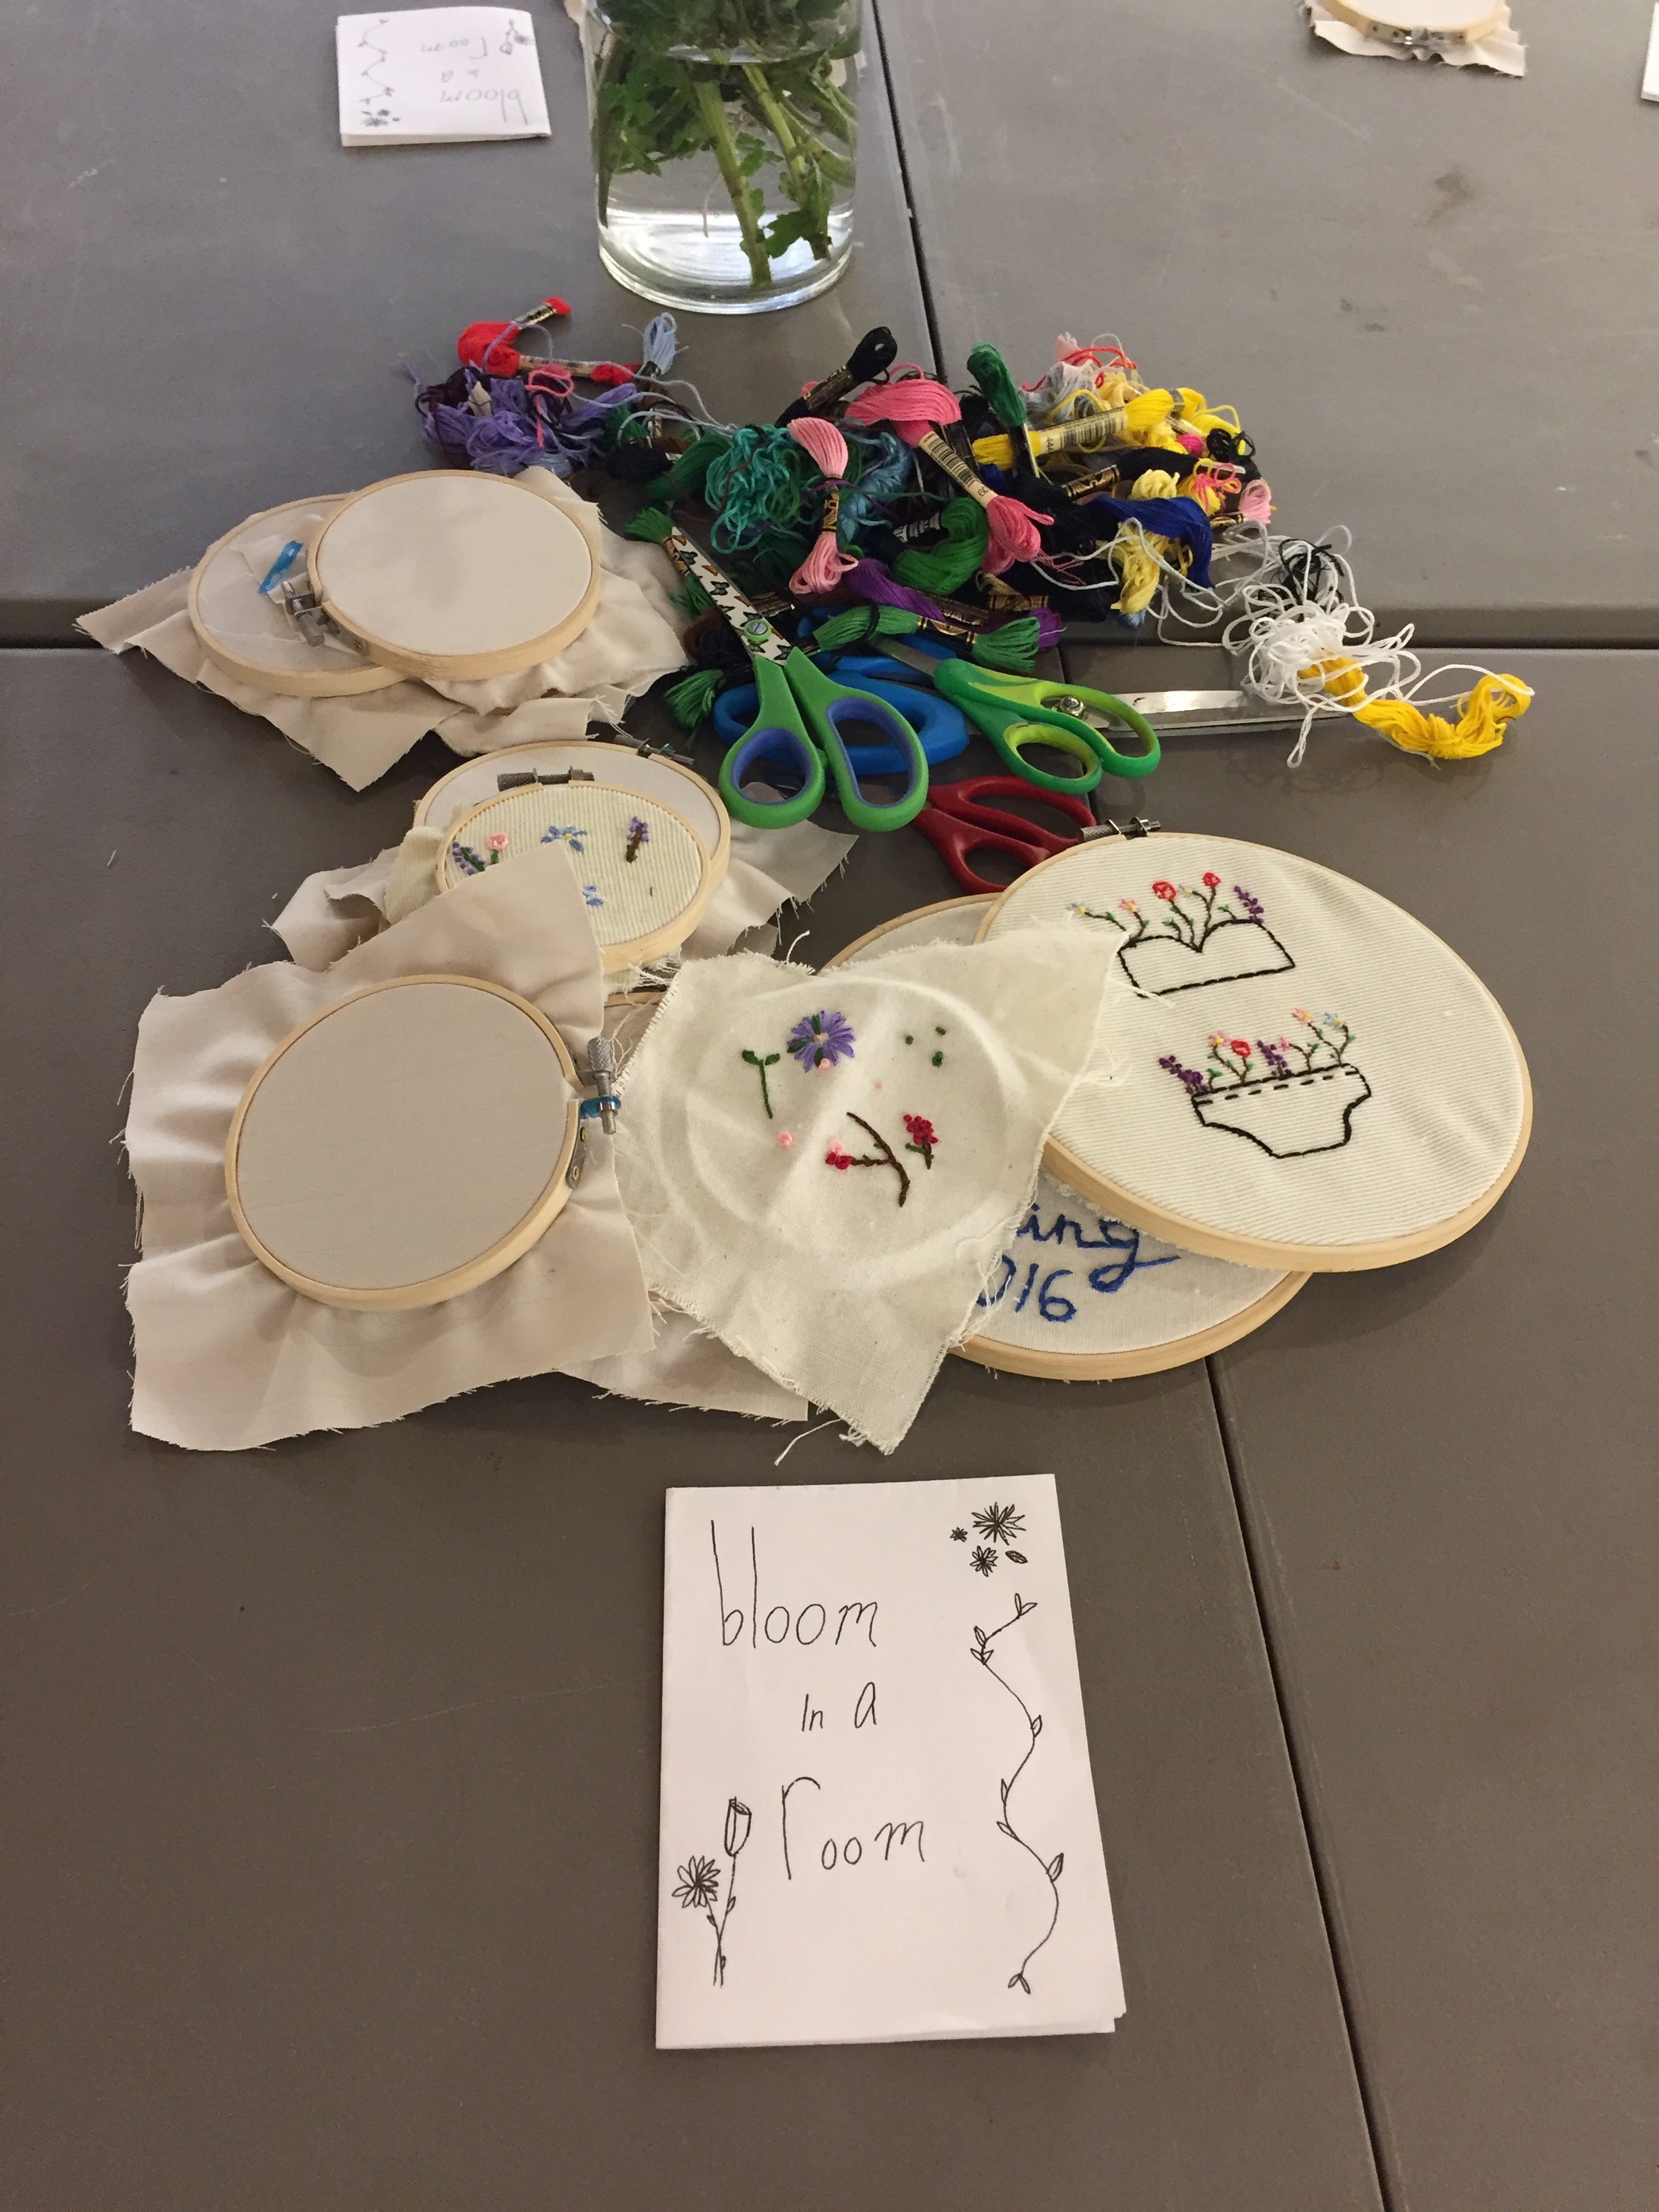 Various cross-stitch pieces on display with scissors, string and paper reading "bloom in a room".